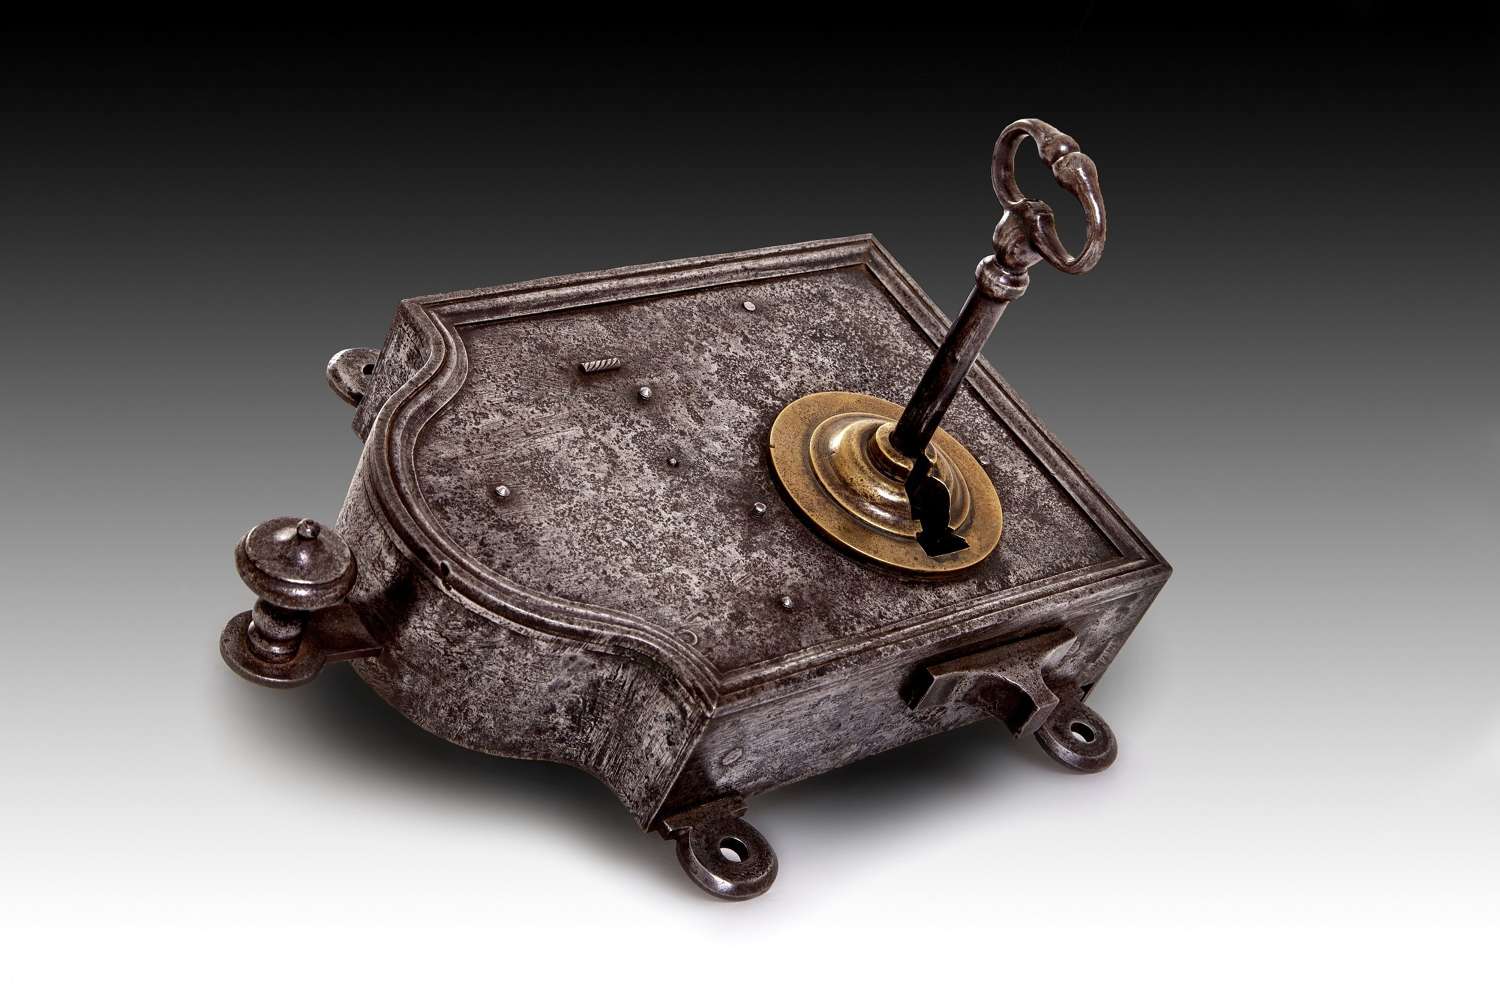 A large 18th century polished steel and brass night lock